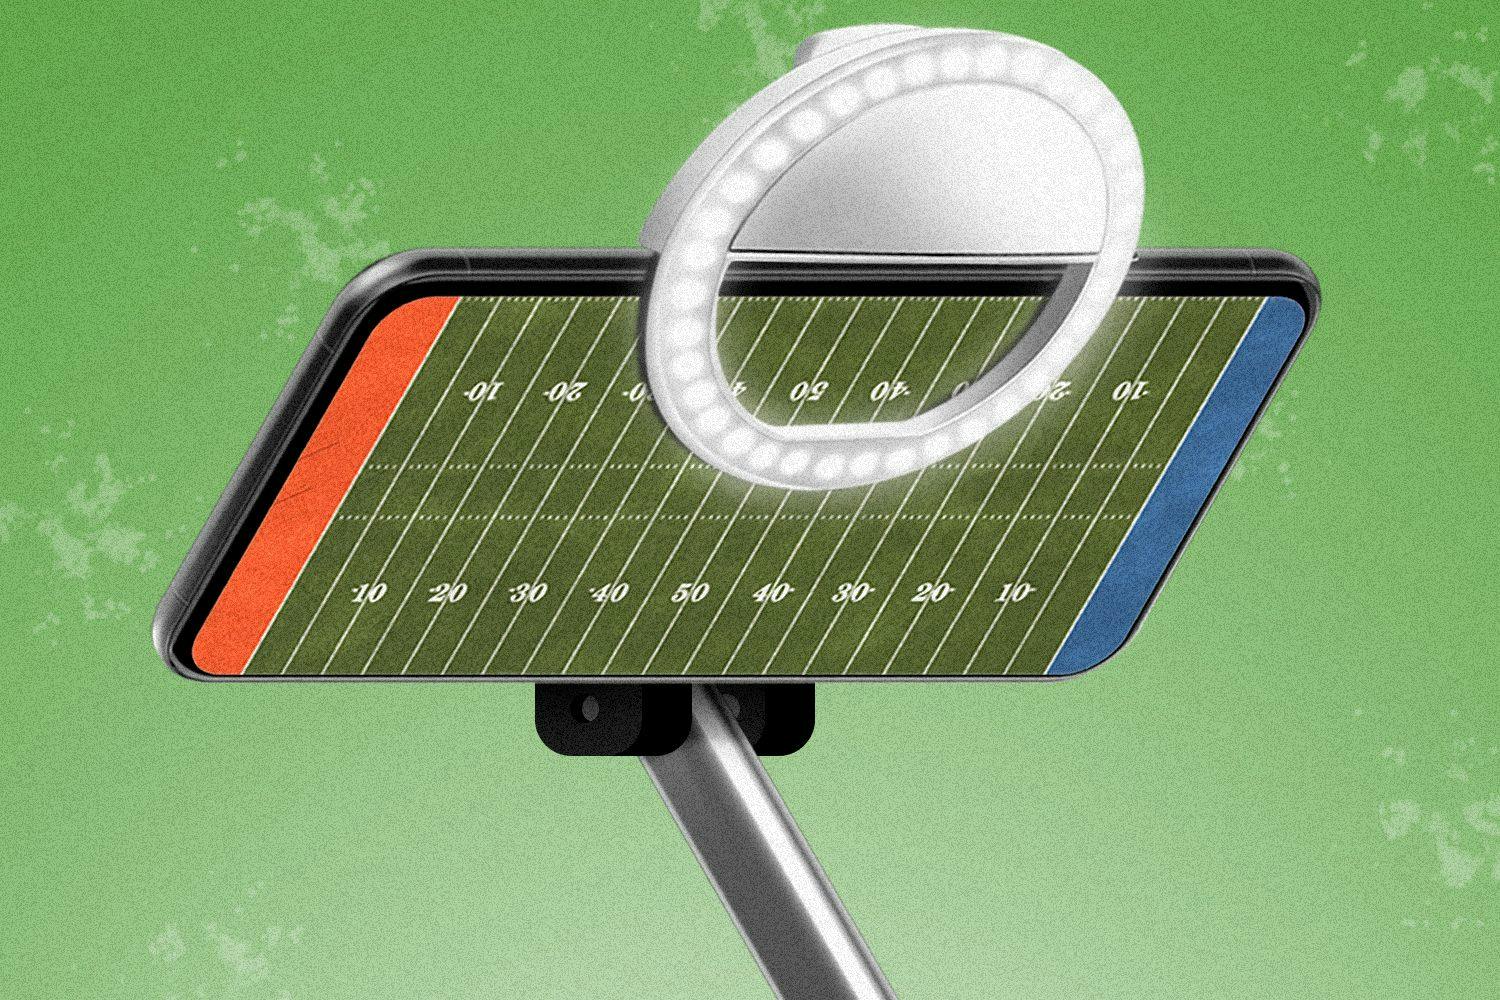 a phone with a football field on the screen. the phone is in a selfie stick / ring light